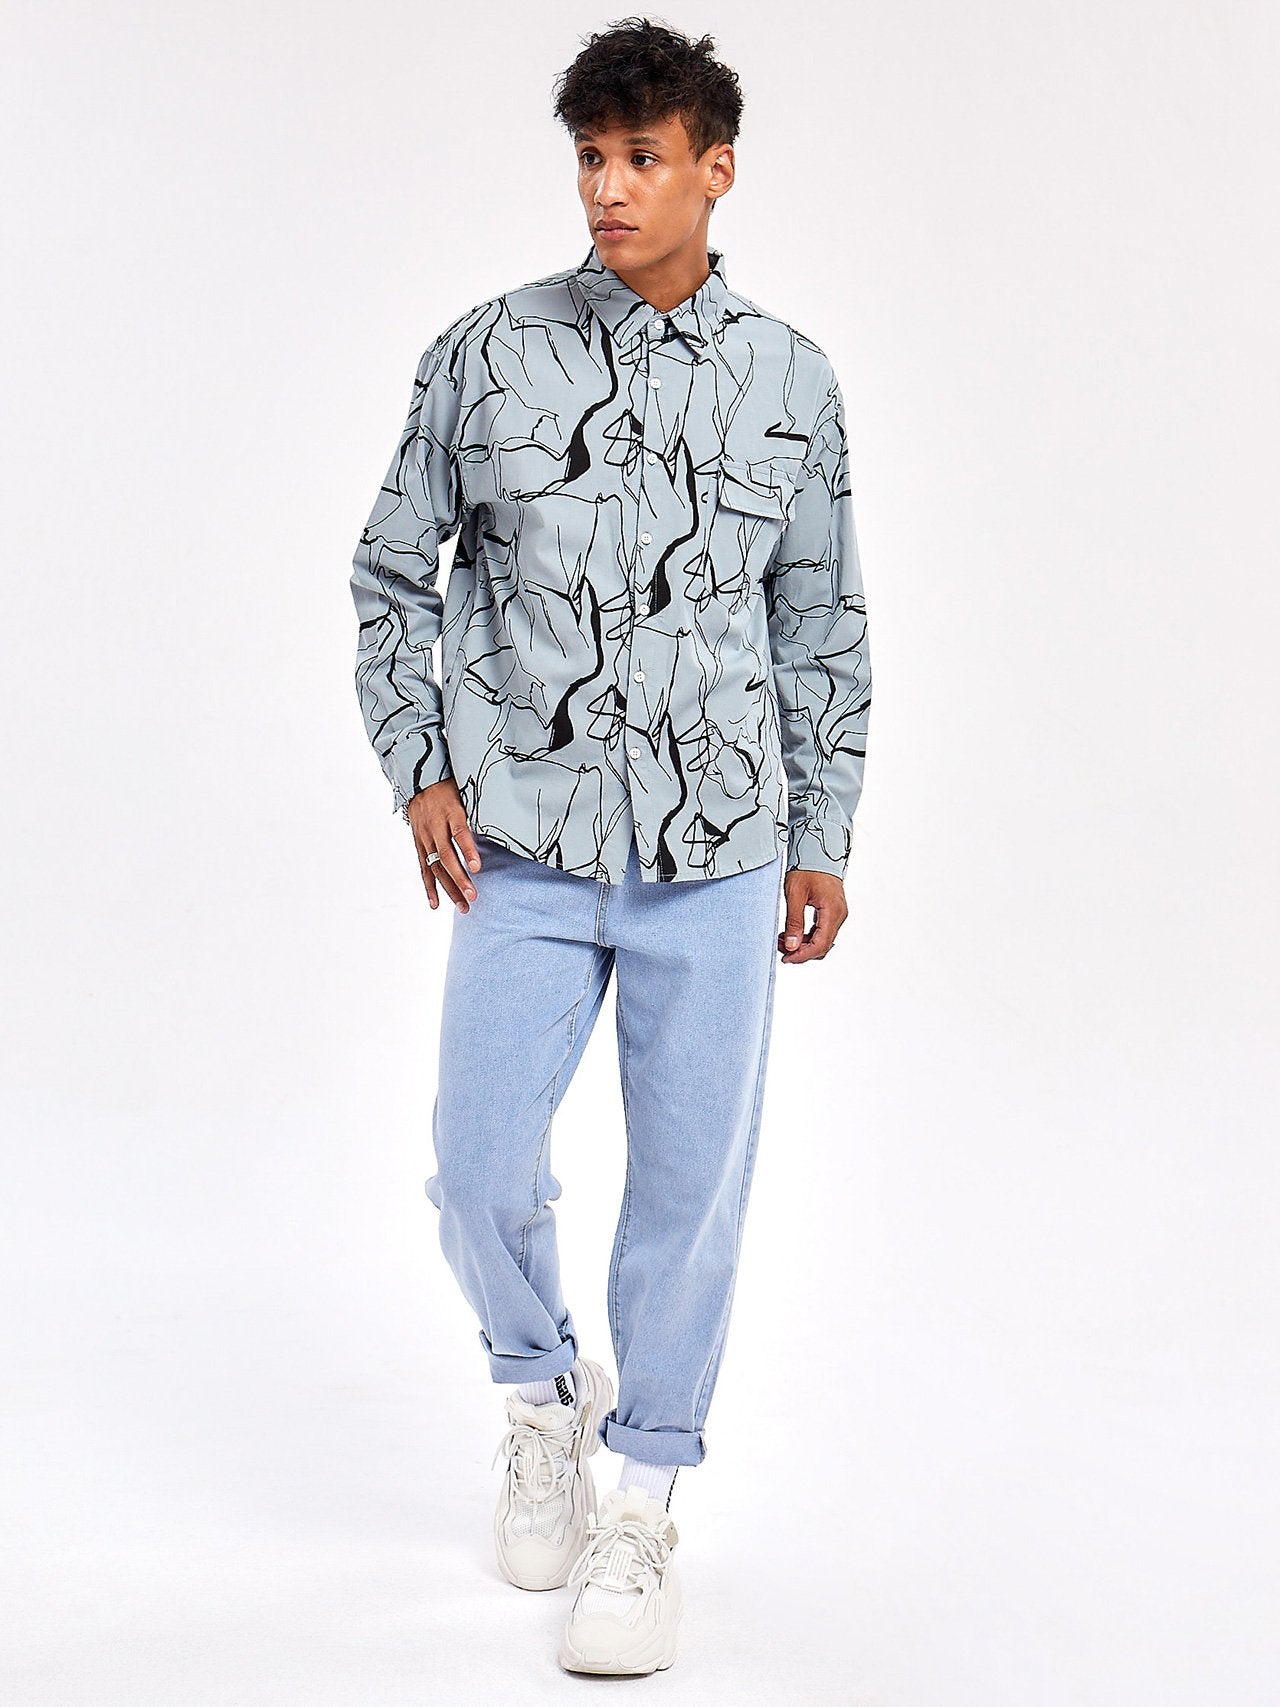 Cotton Printed Turn-down Collar Shirts for men's